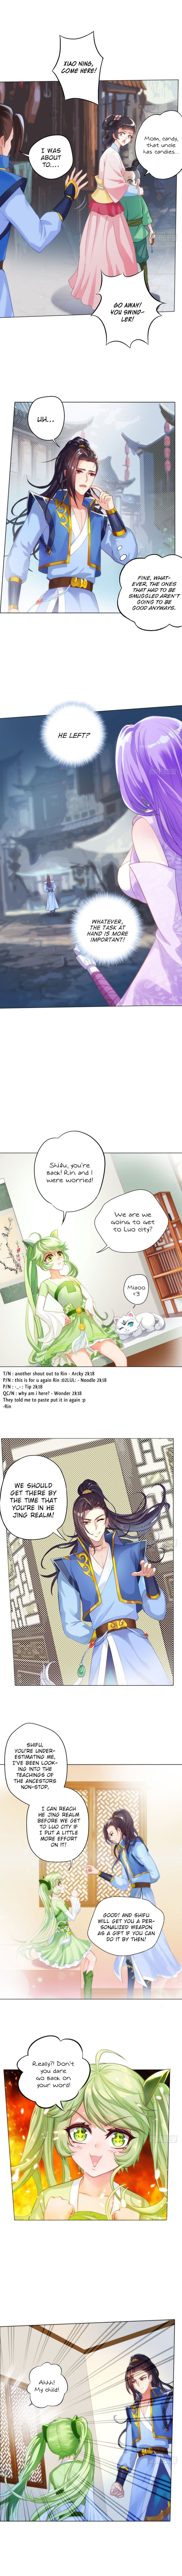 Lang Huan Library Chapter 5 page 5